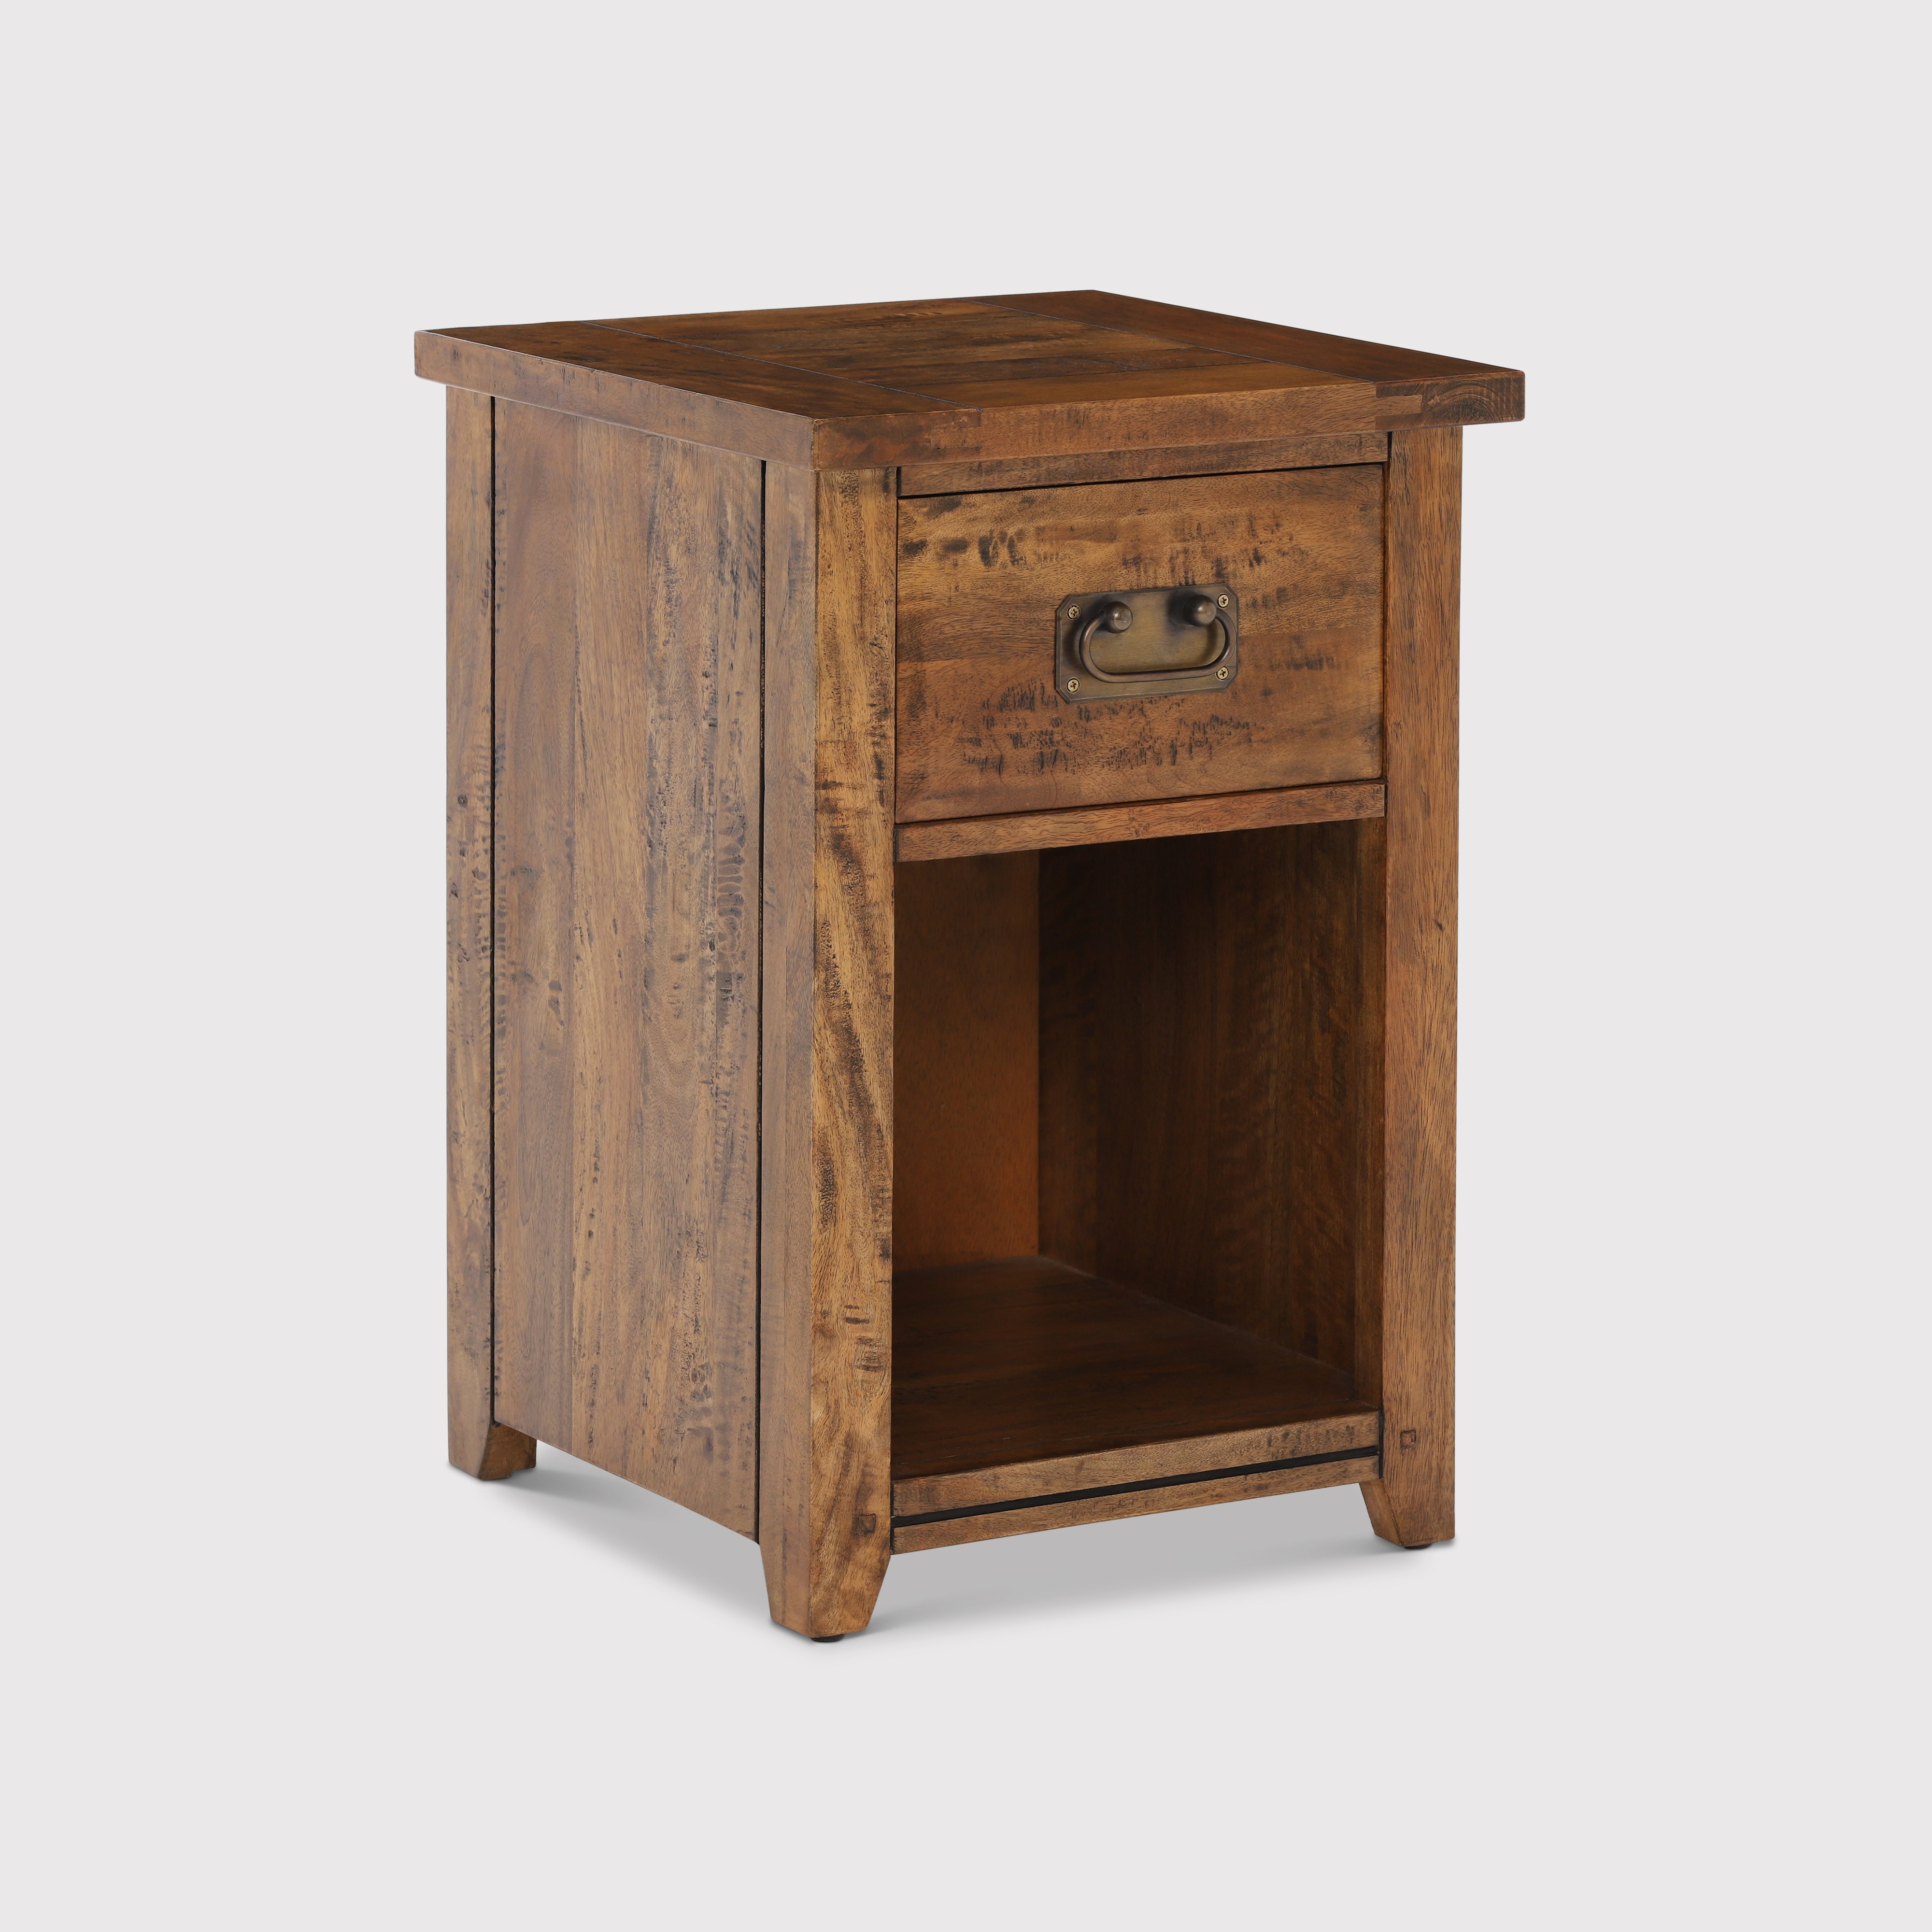 New Frontier 1 Drawer Bedside Table, Mango Wood | Barker & Stonehouse